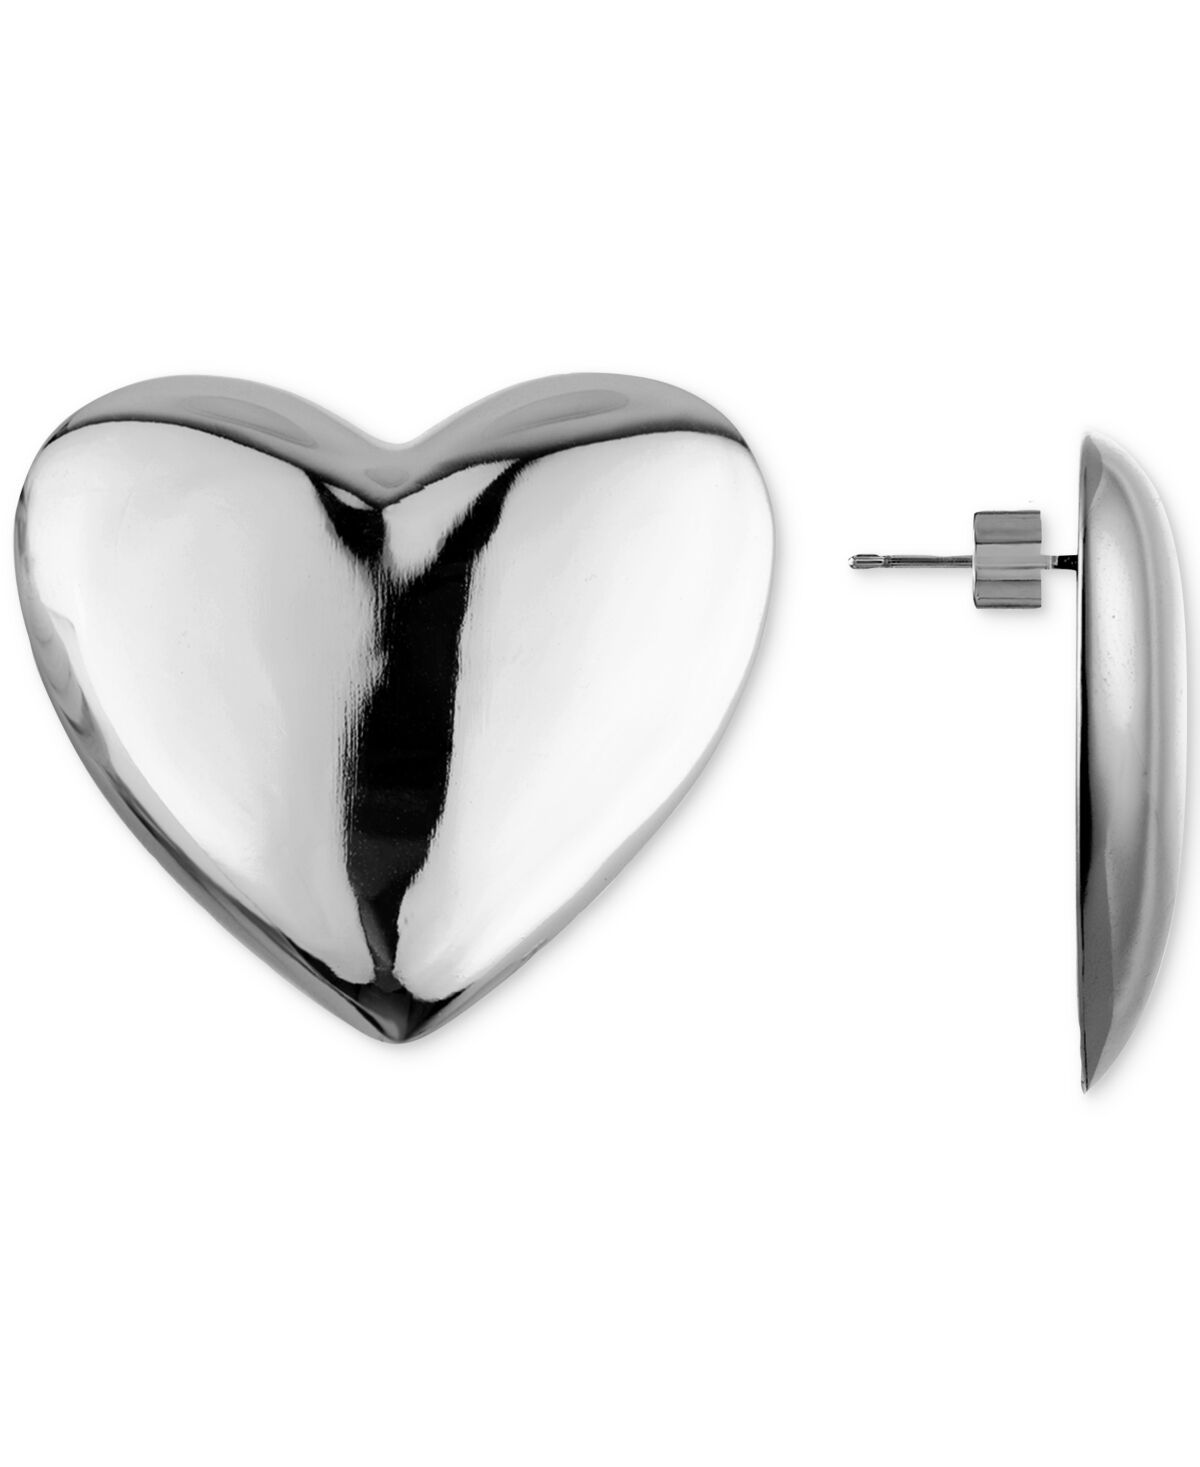 Oma The Label Vintage Heart Statement Stud Earrings - Silver Tone